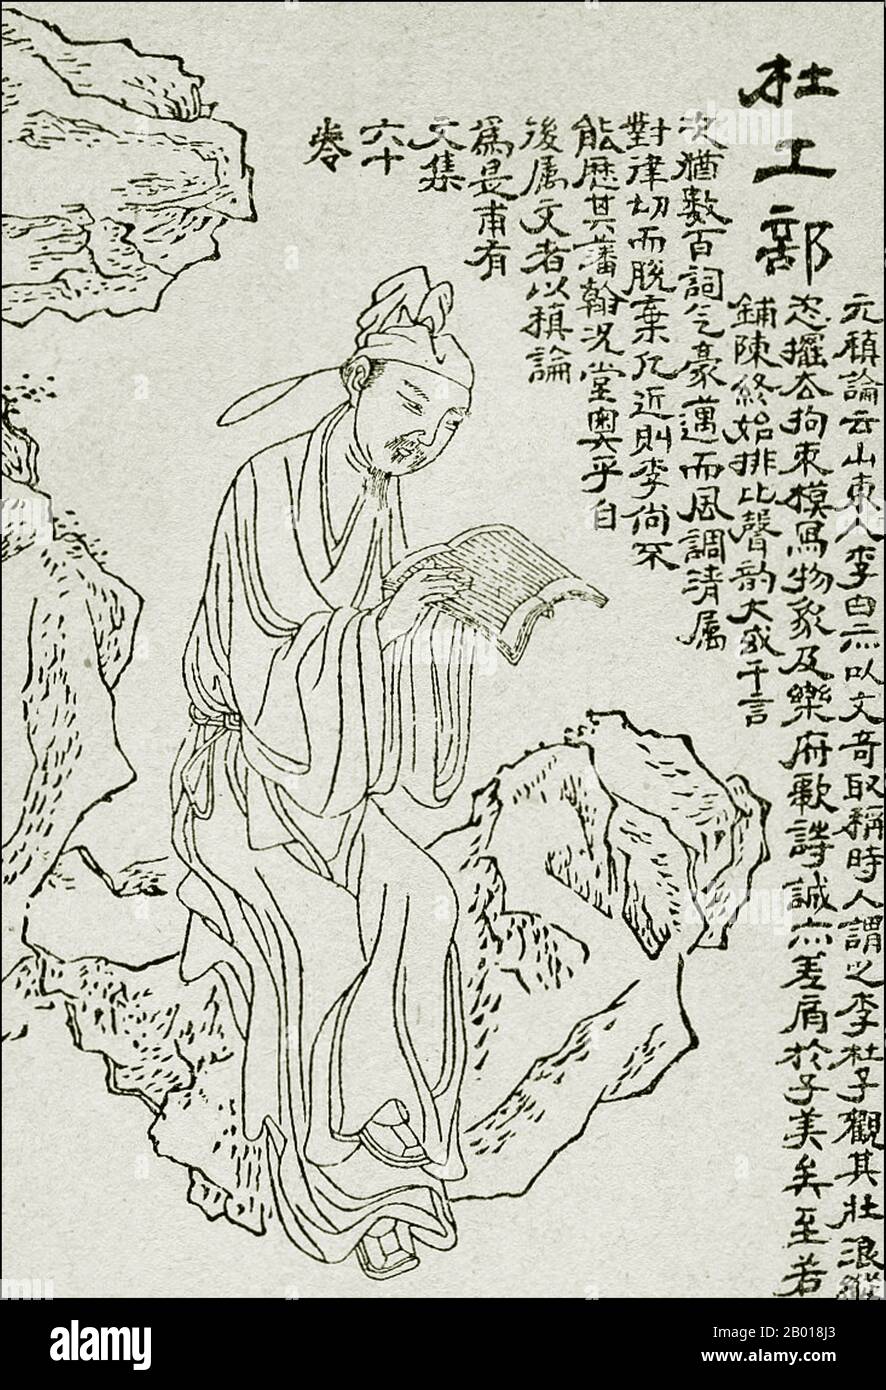 China: Du Fu (Tu Fu, 712-770), celebrated Tang Dynasty poet and historian. Illustration by Shangguan Zhou (c. 1665-1750), c. 1743.  Du Fu was a prominent Chinese poet of the Tang Dynasty. Along with Li Bai (Li Bo), he is frequently called the greatest of the Chinese poets. His greatest ambition was to serve his country as a successful civil servant, but he proved unable to make the necessary accommodations. His life, like the whole country, was devastated by the An Lushan Rebellion of 755, and his last 15 years were a time of almost constant unrest. Stock Photo